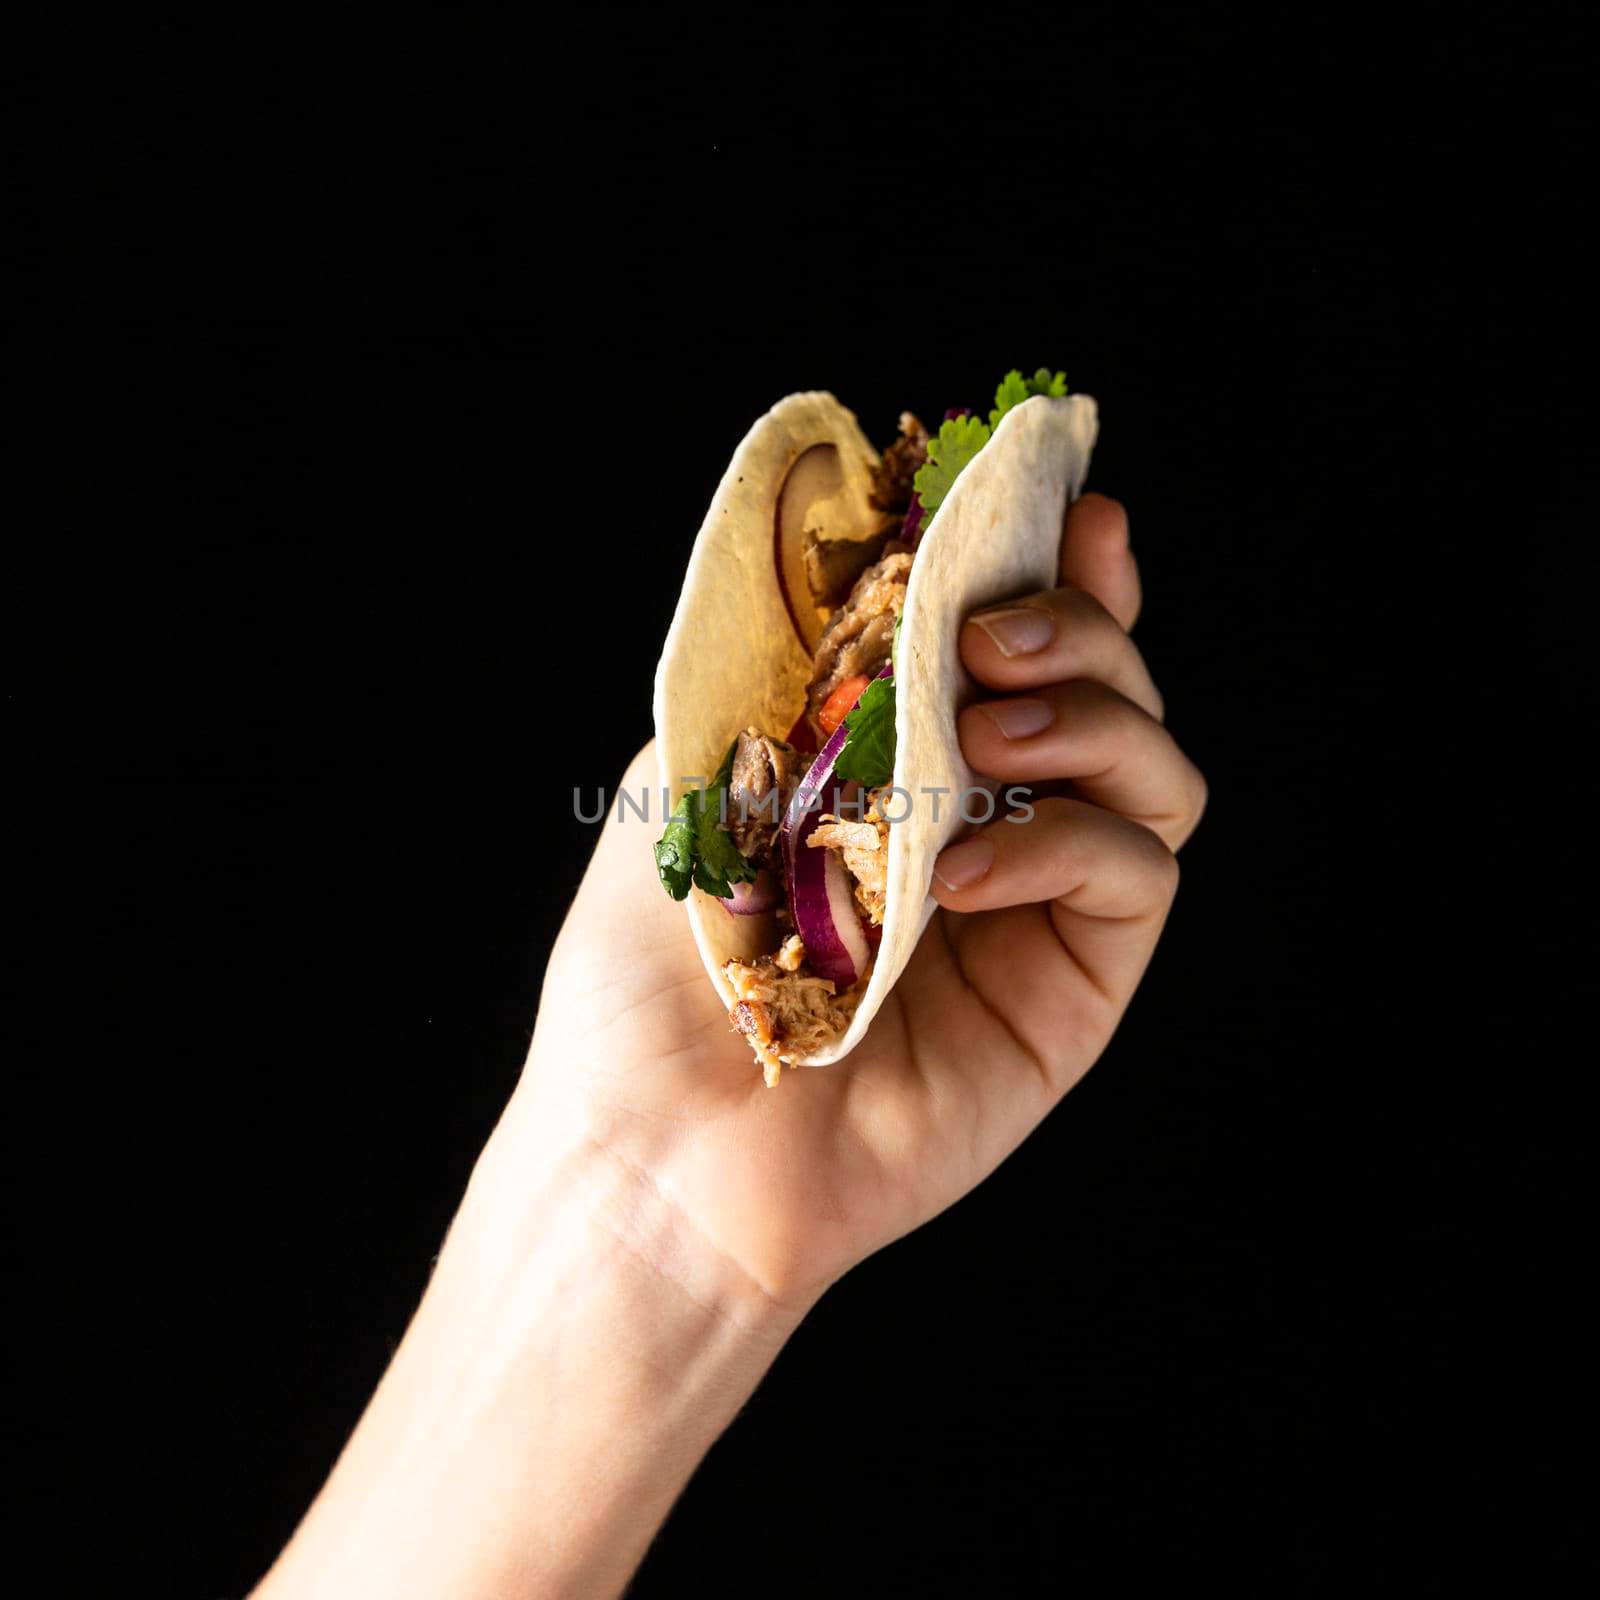 close up hand holding taco with meat. High quality photo by Zahard